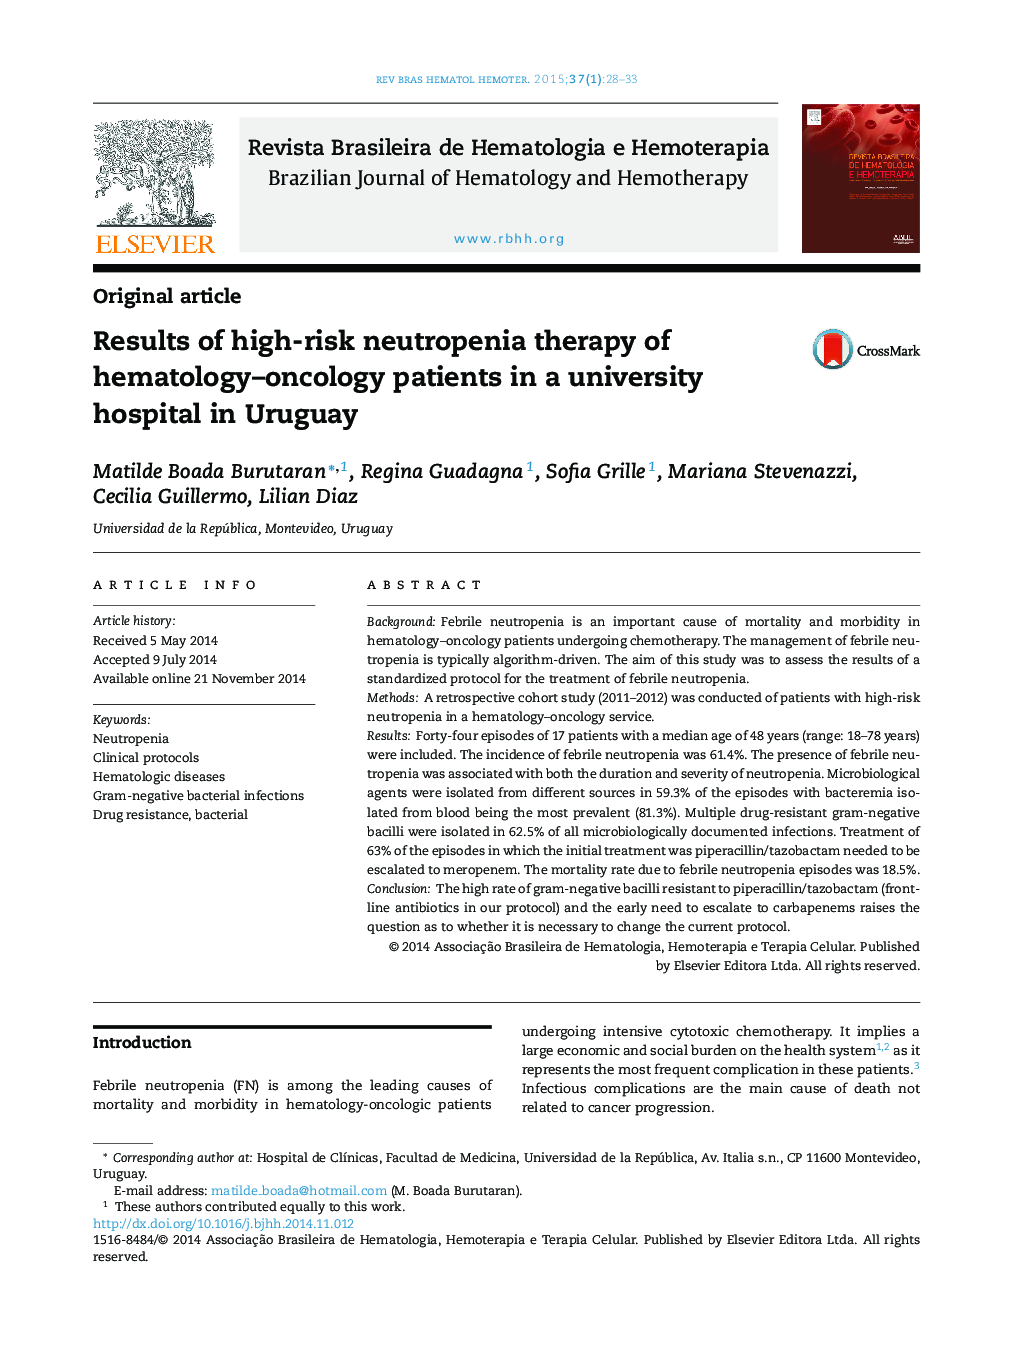 Results of high-risk neutropenia therapy of hematology–oncology patients in a university hospital in Uruguay